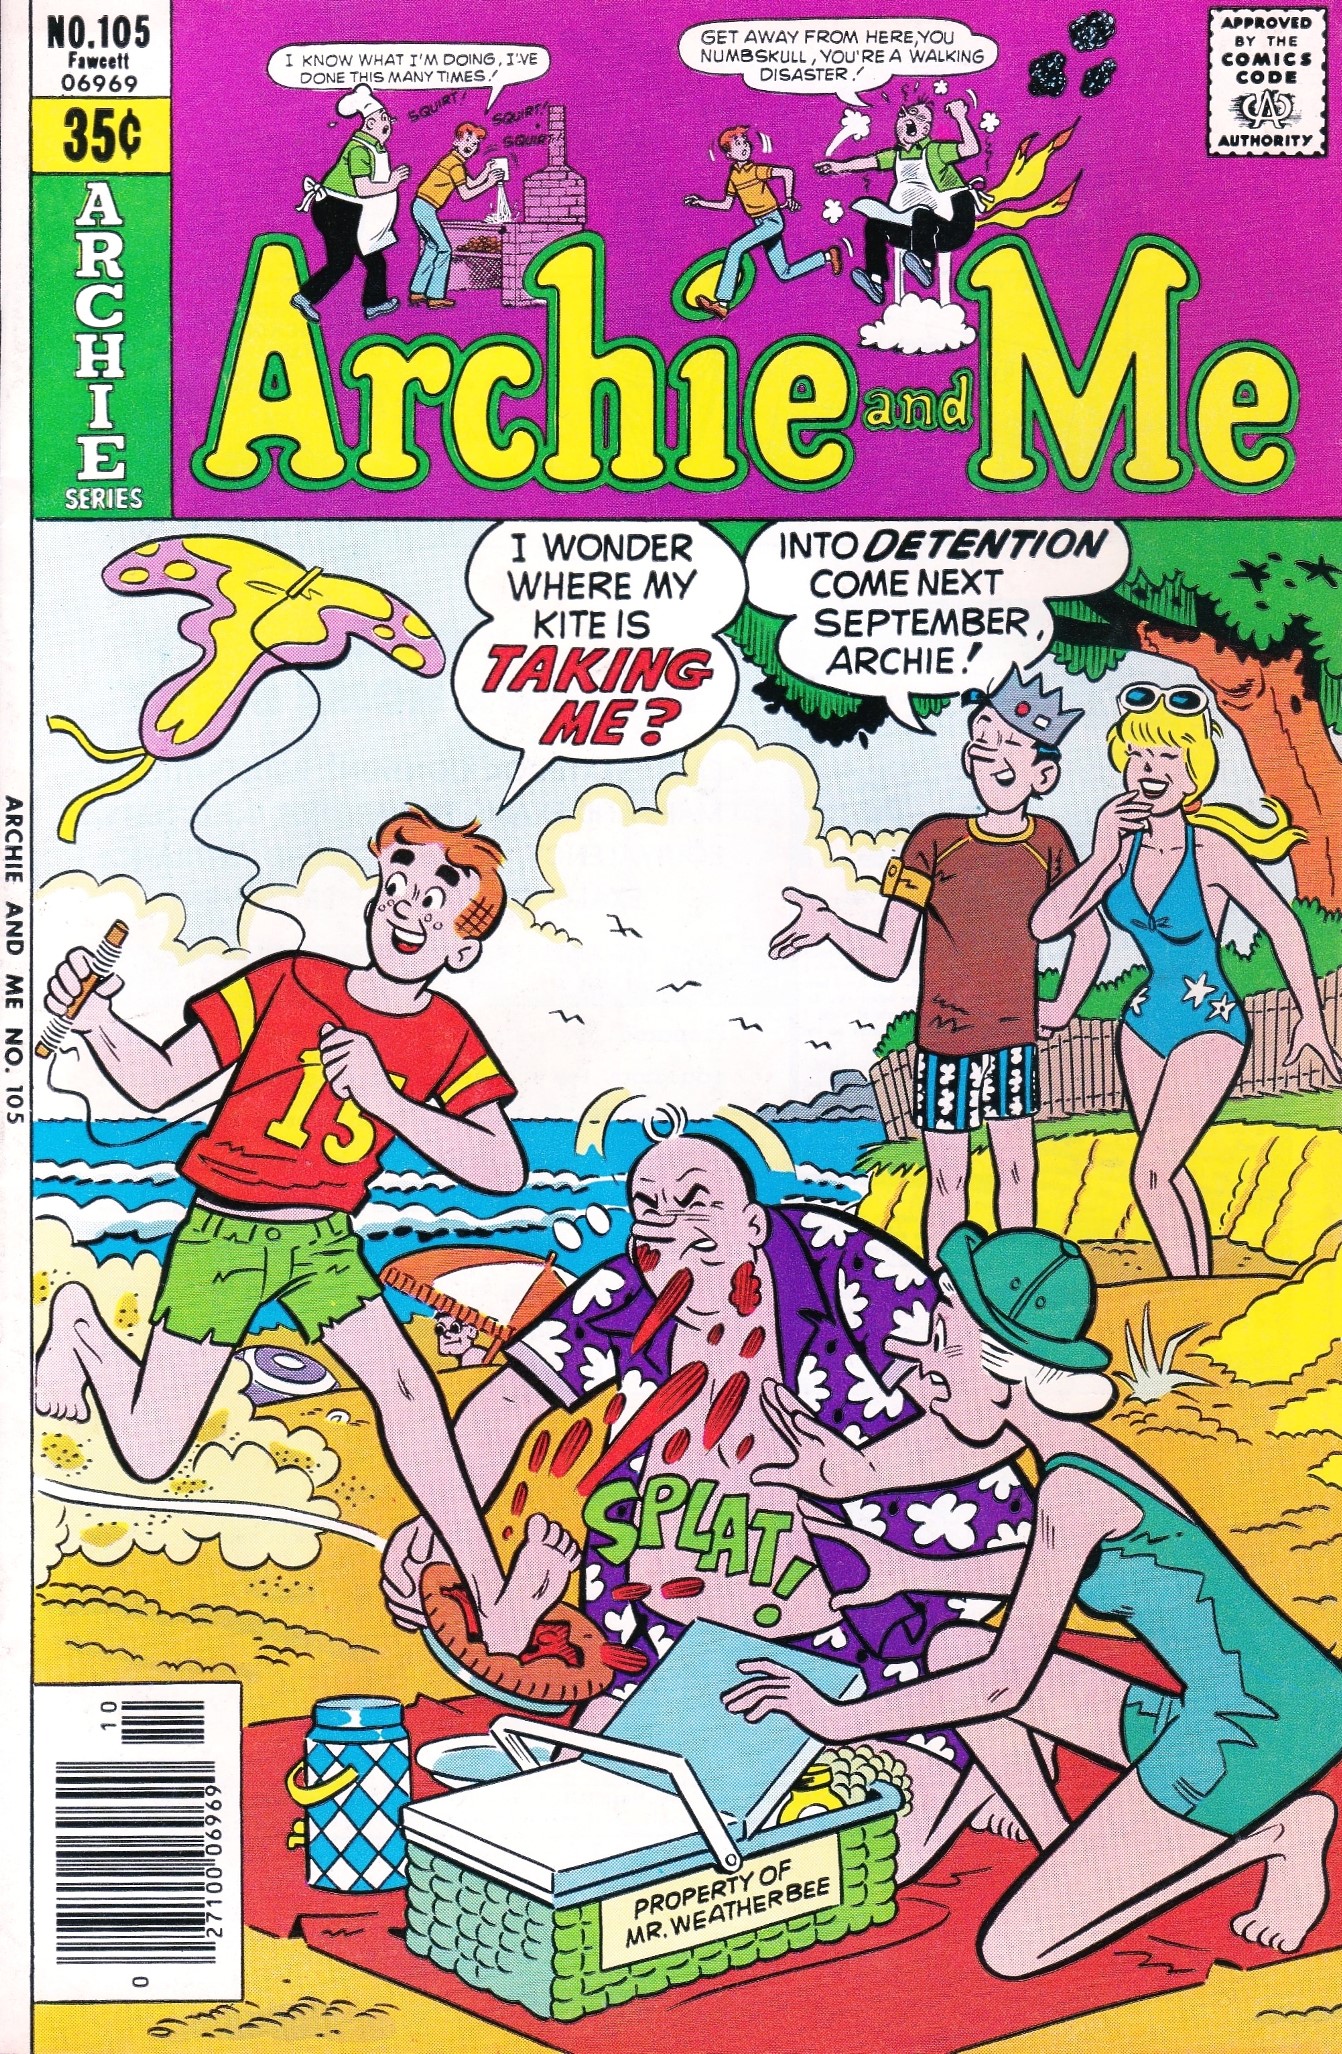 Read online Archie and Me comic -  Issue #105 - 1